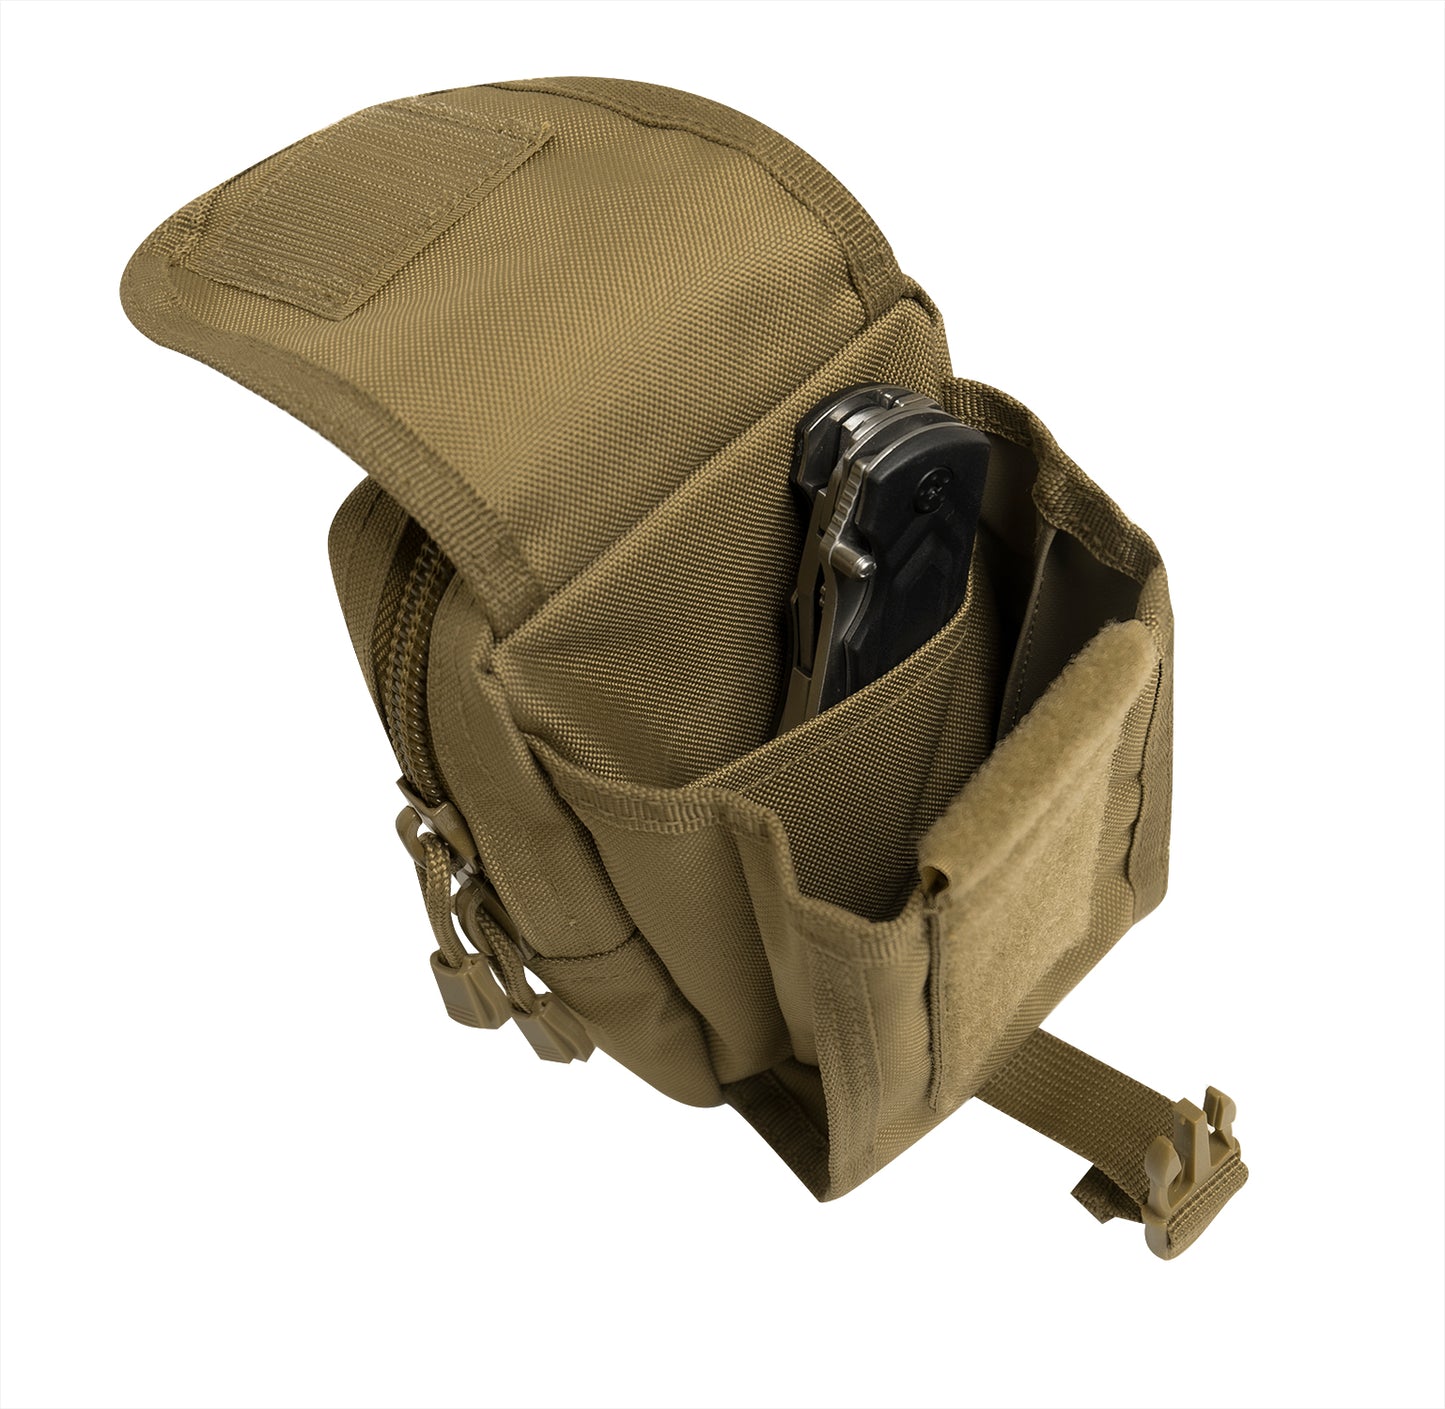 Rothco MOLLE Compatible EDC (Everyday Carry) Accessory Pouch